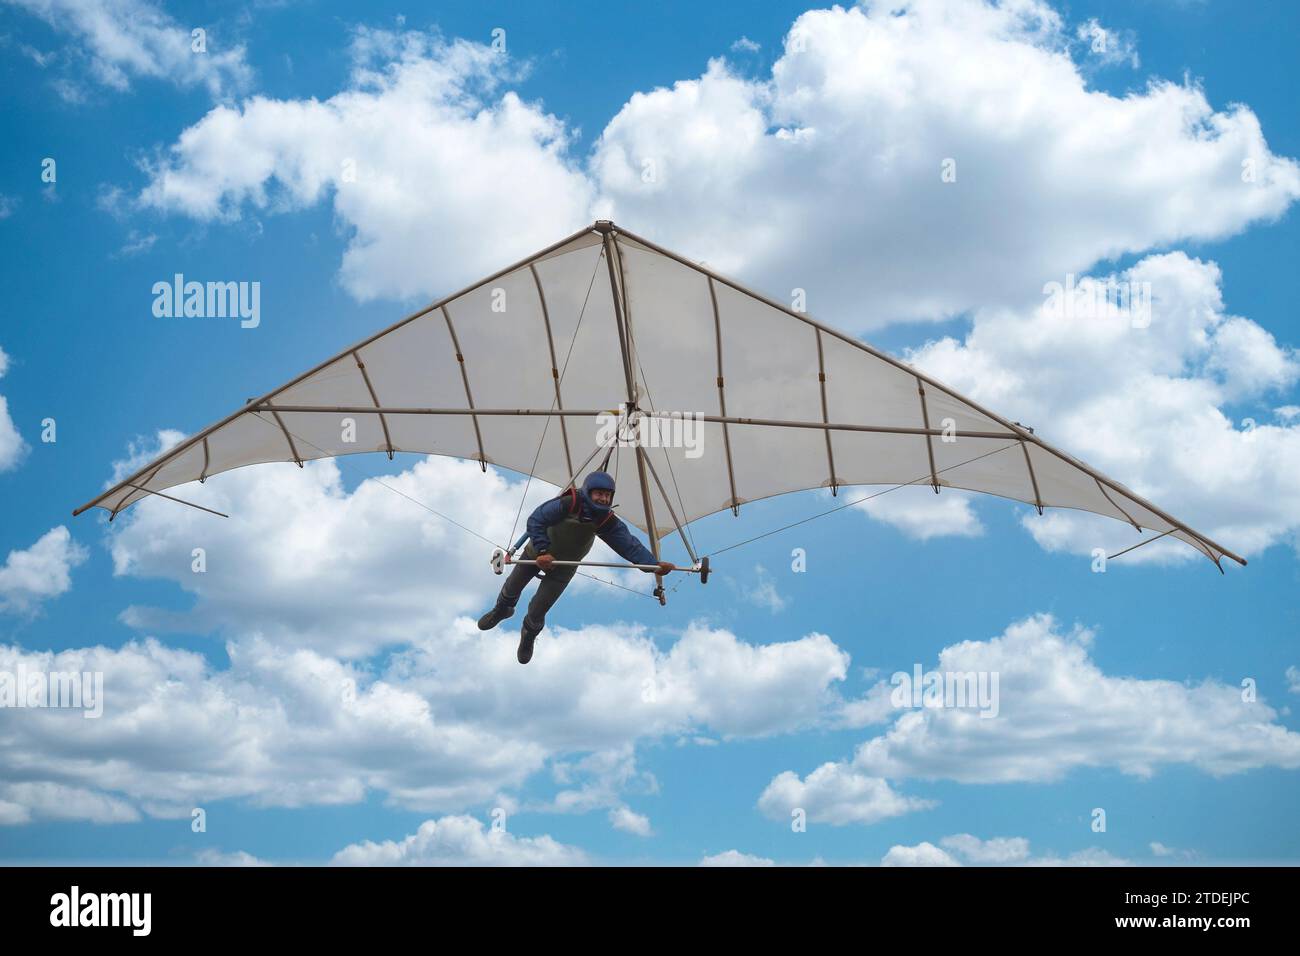 Old vintage hang glider paraglider kite in the sky with clouds. Learning to fly. Dream of flying. Modern Icarus. Stock Photo